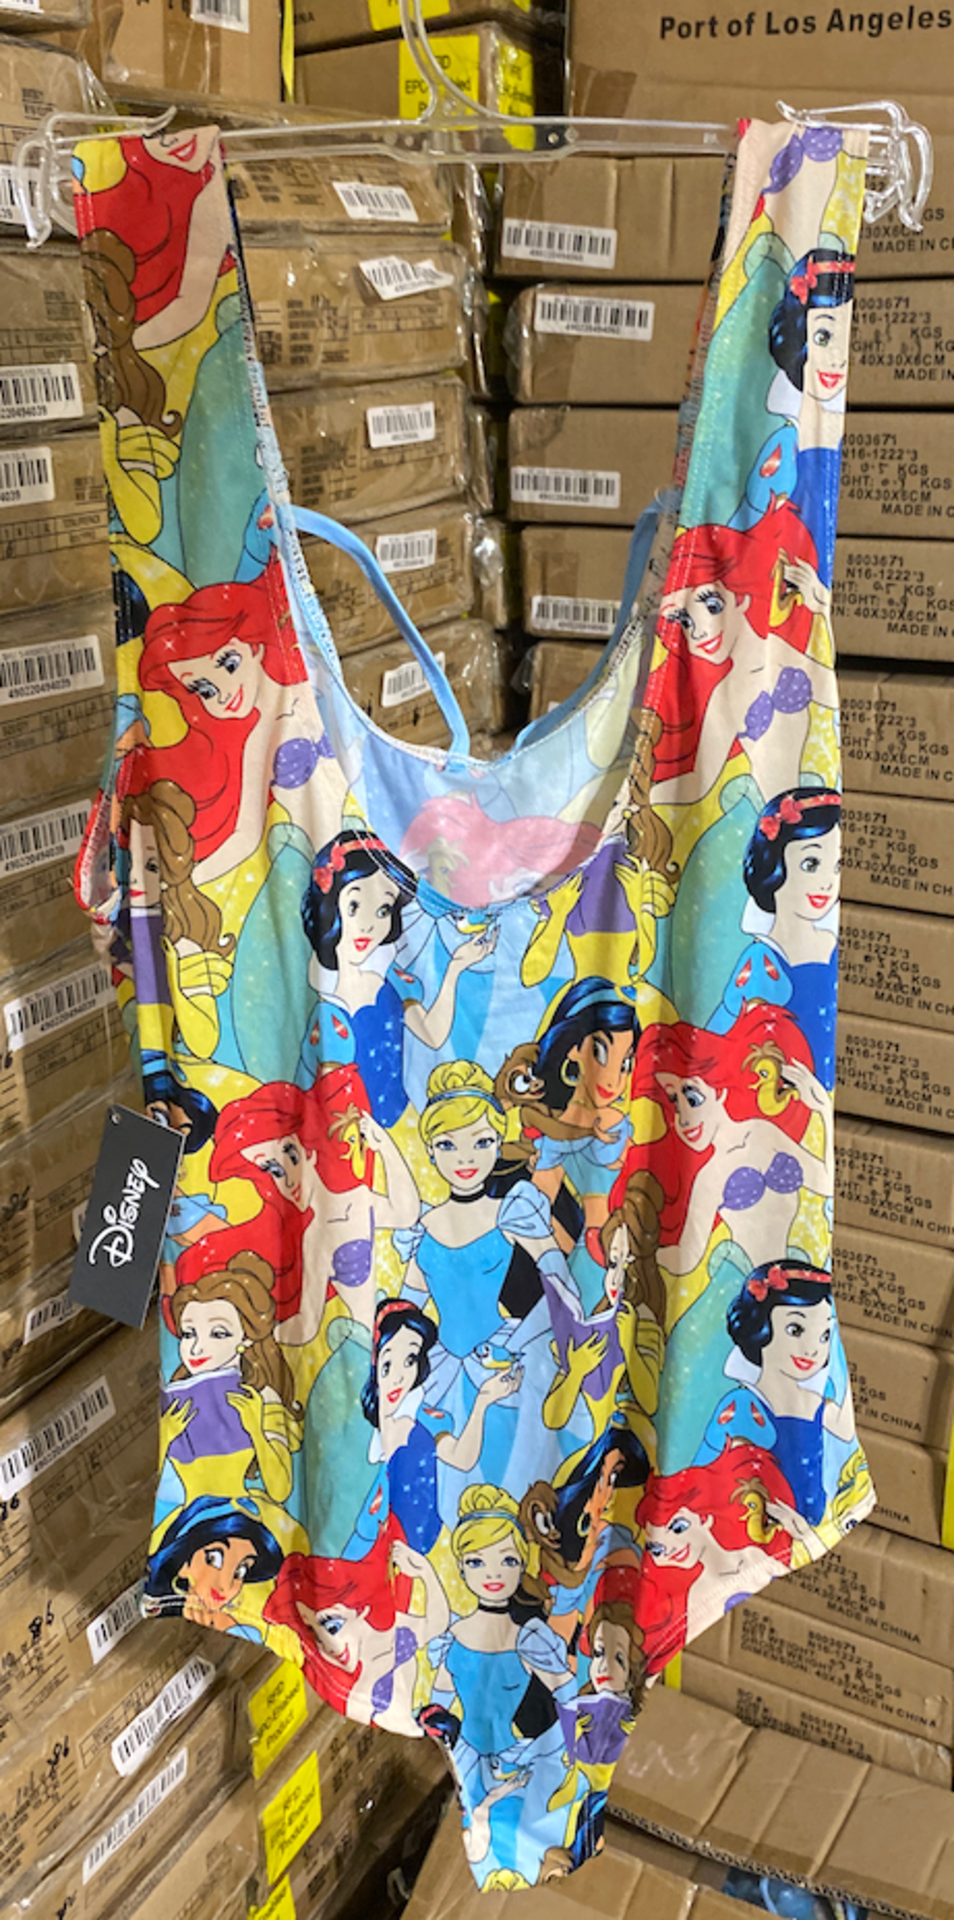 735 DISNEY'S PRINCESS GIRLS BODYSUIT, NEW WITH TAGS ON HANGERS LOCATED IN MIAMI, FL $11,000 VALUE - Image 2 of 4